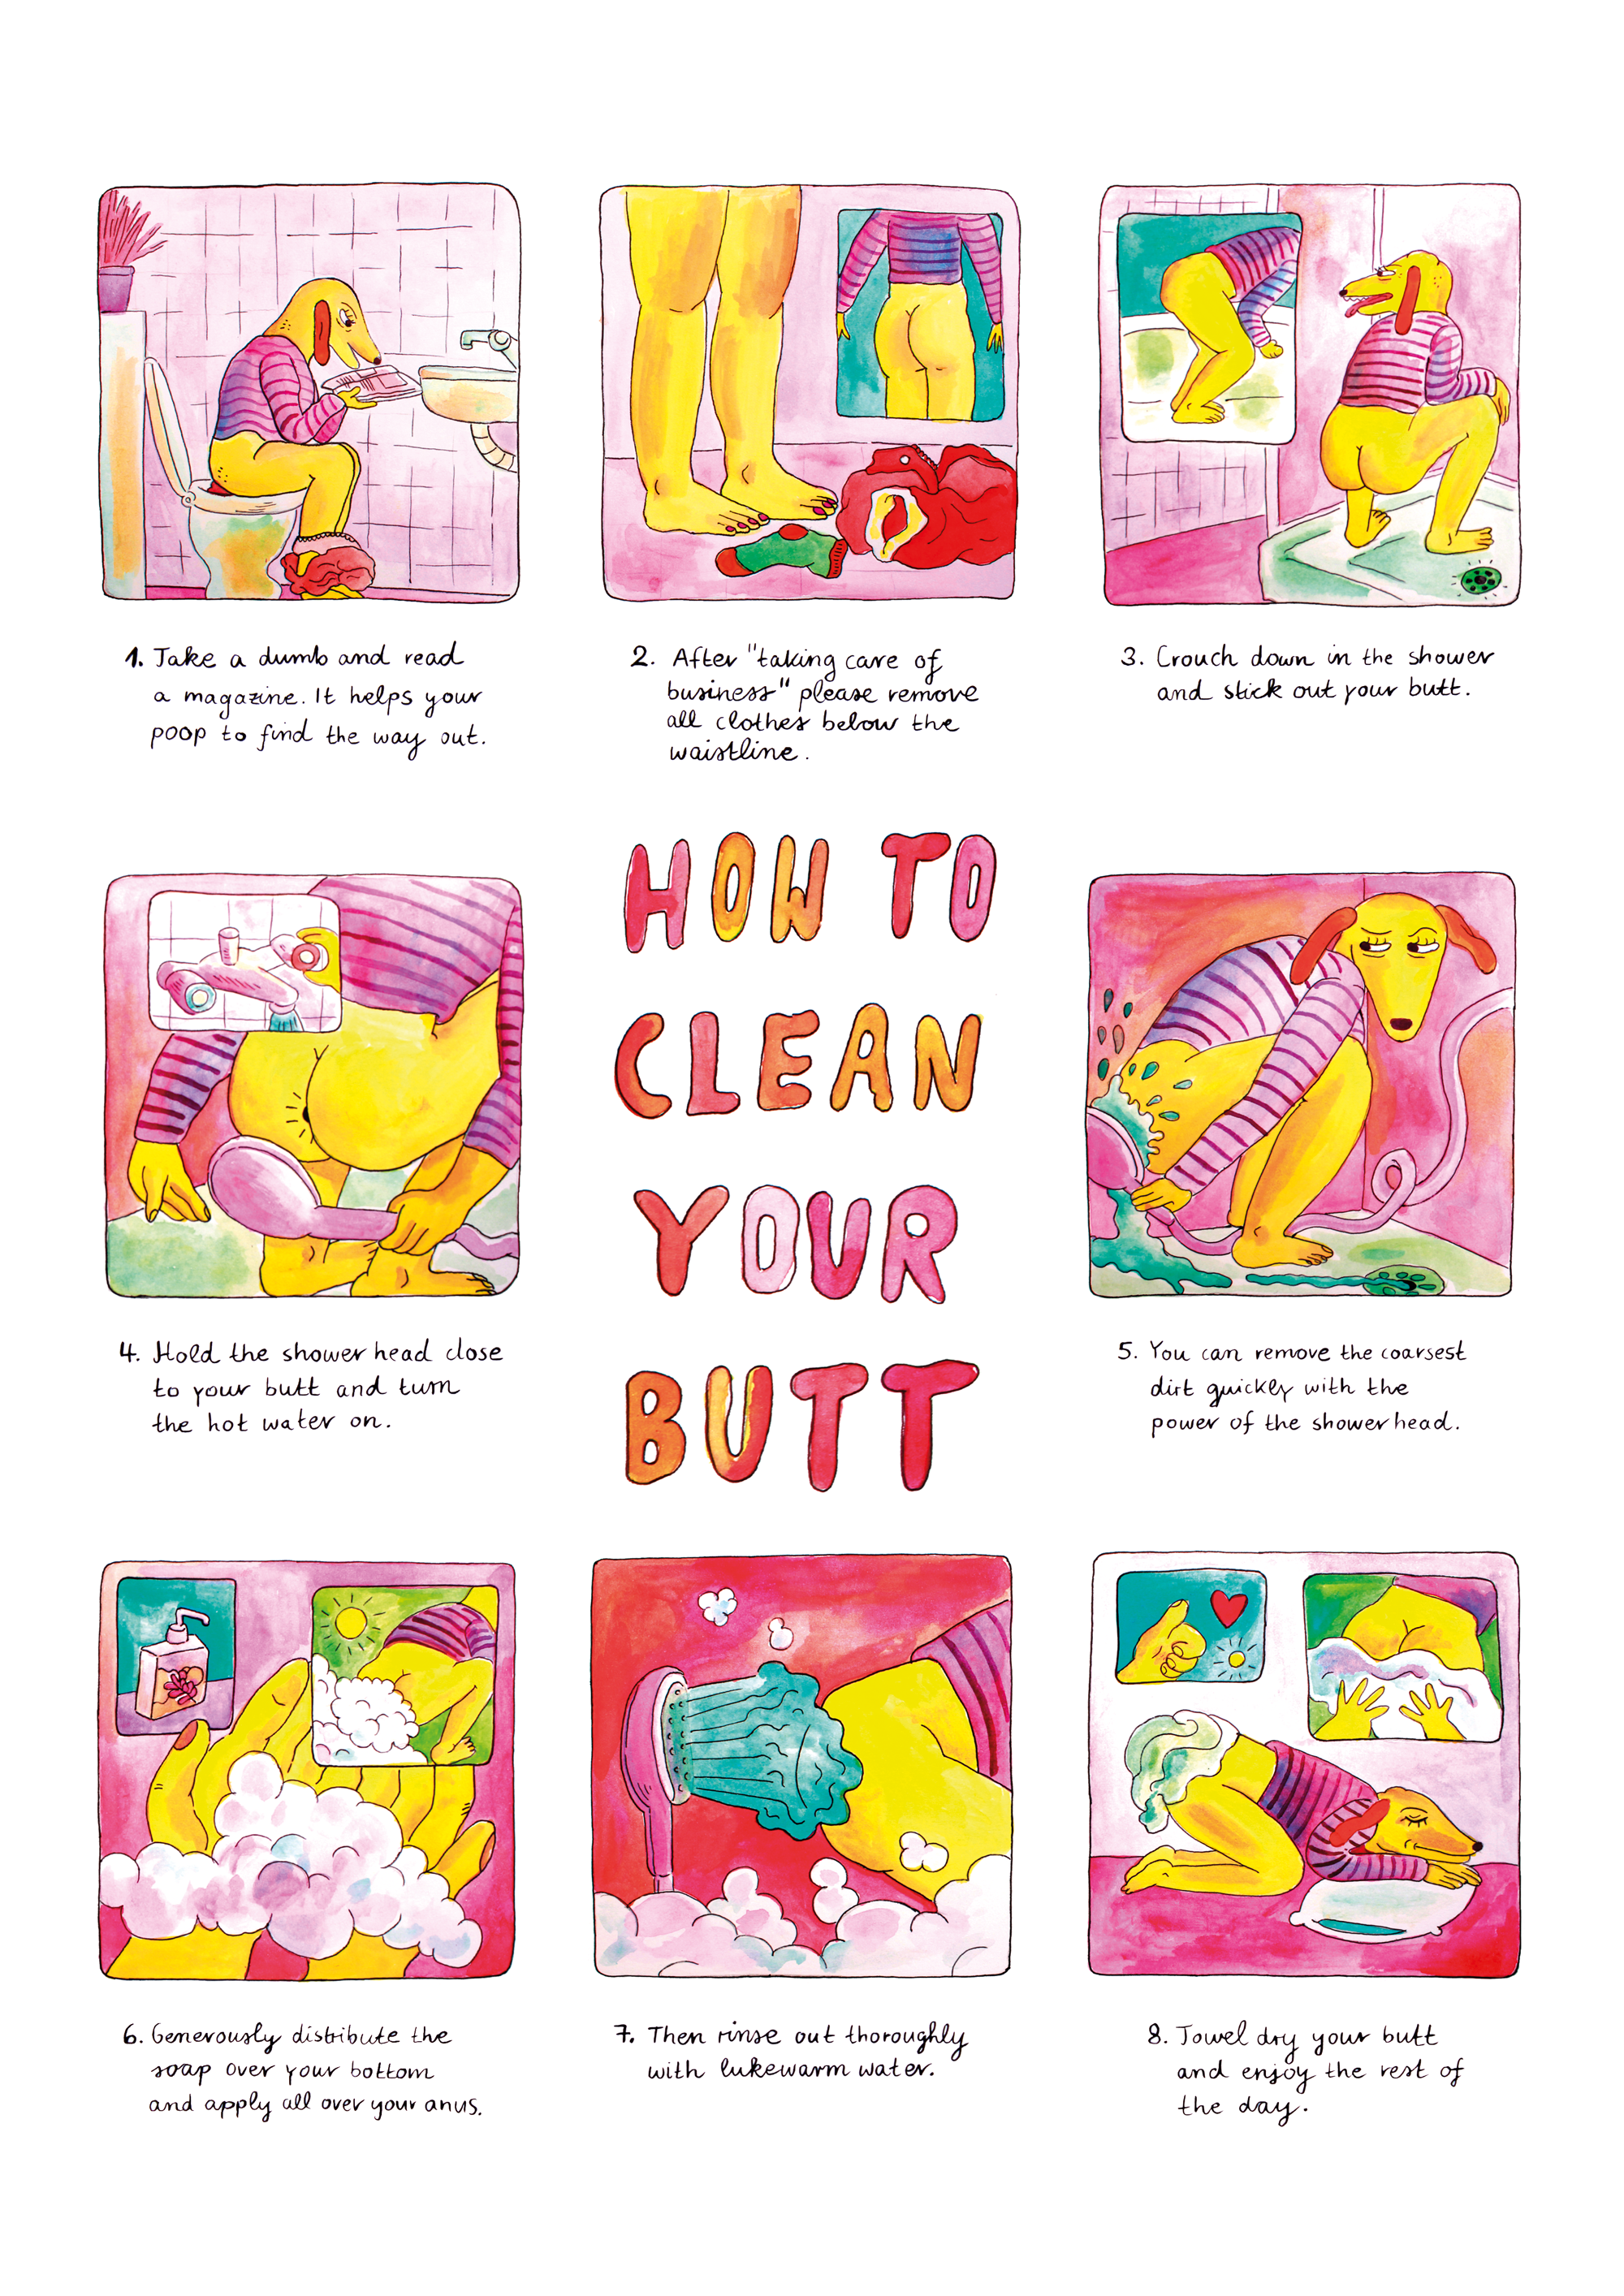 How to clean your butt